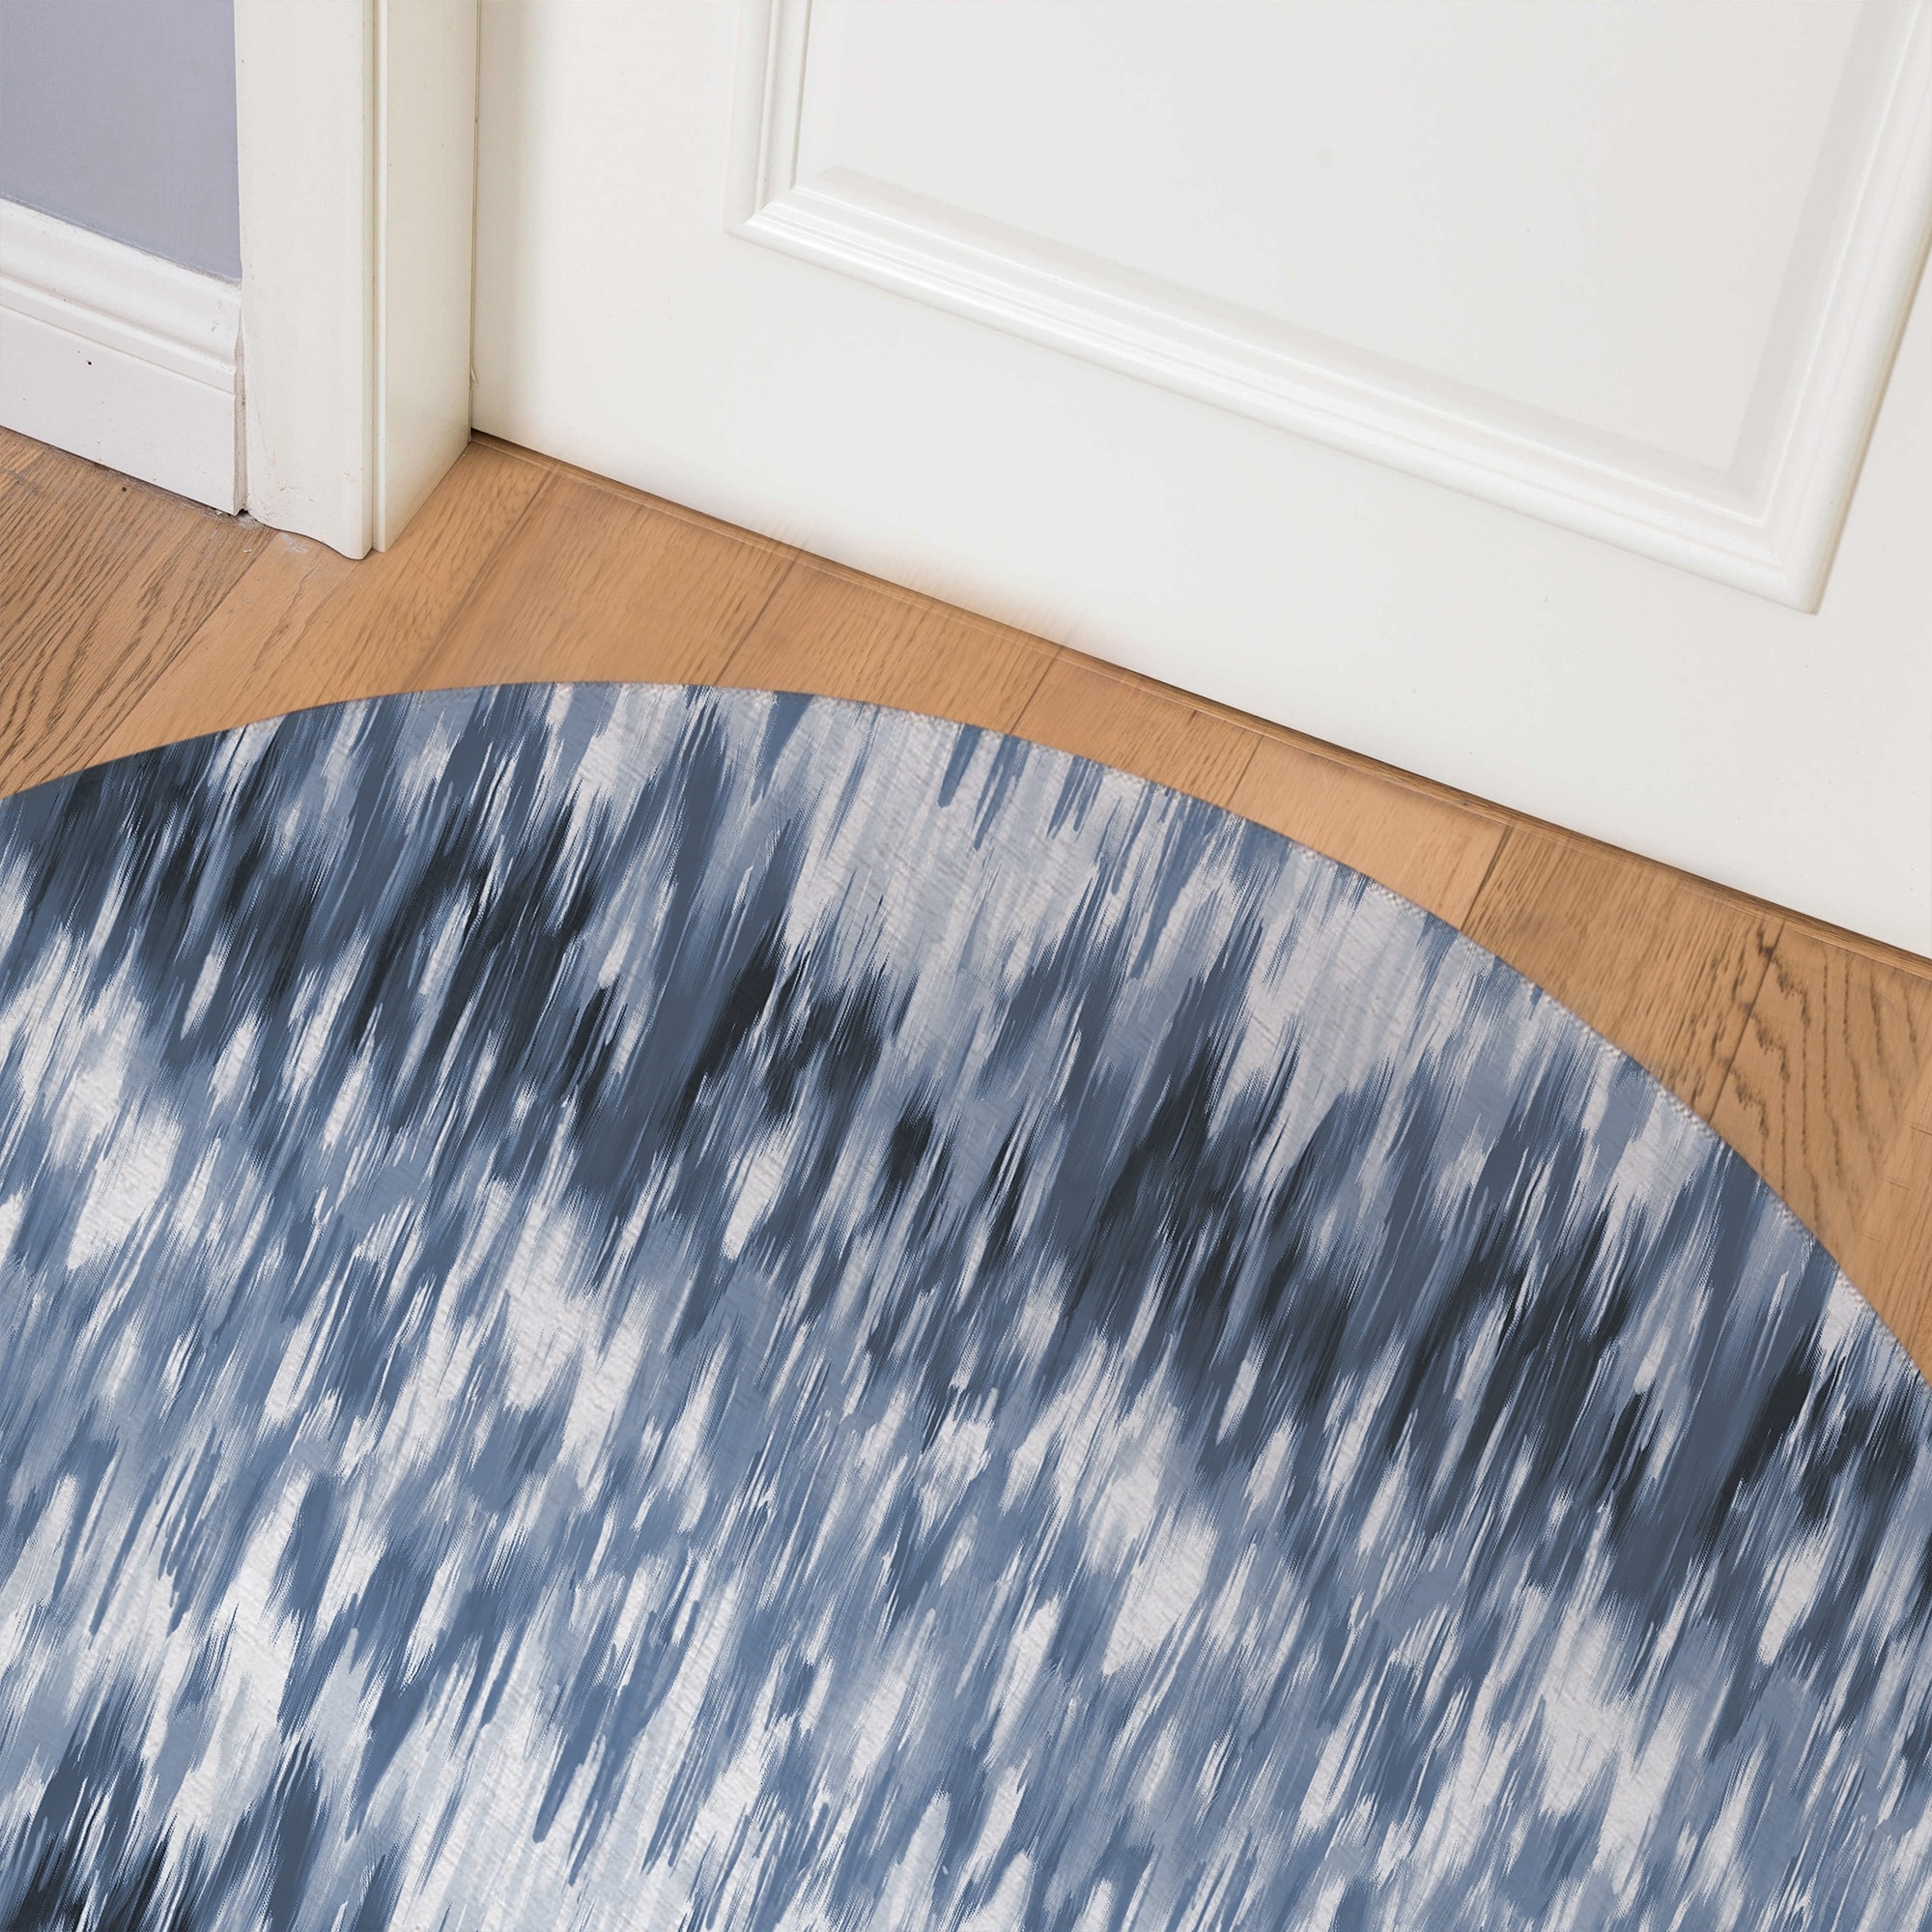 https://ak1.ostkcdn.com/images/products/is/images/direct/87330b27414ae19d7f071337829b50614a24ab70/BLUE-IKAT-Indoor-Floor-Mat.jpg